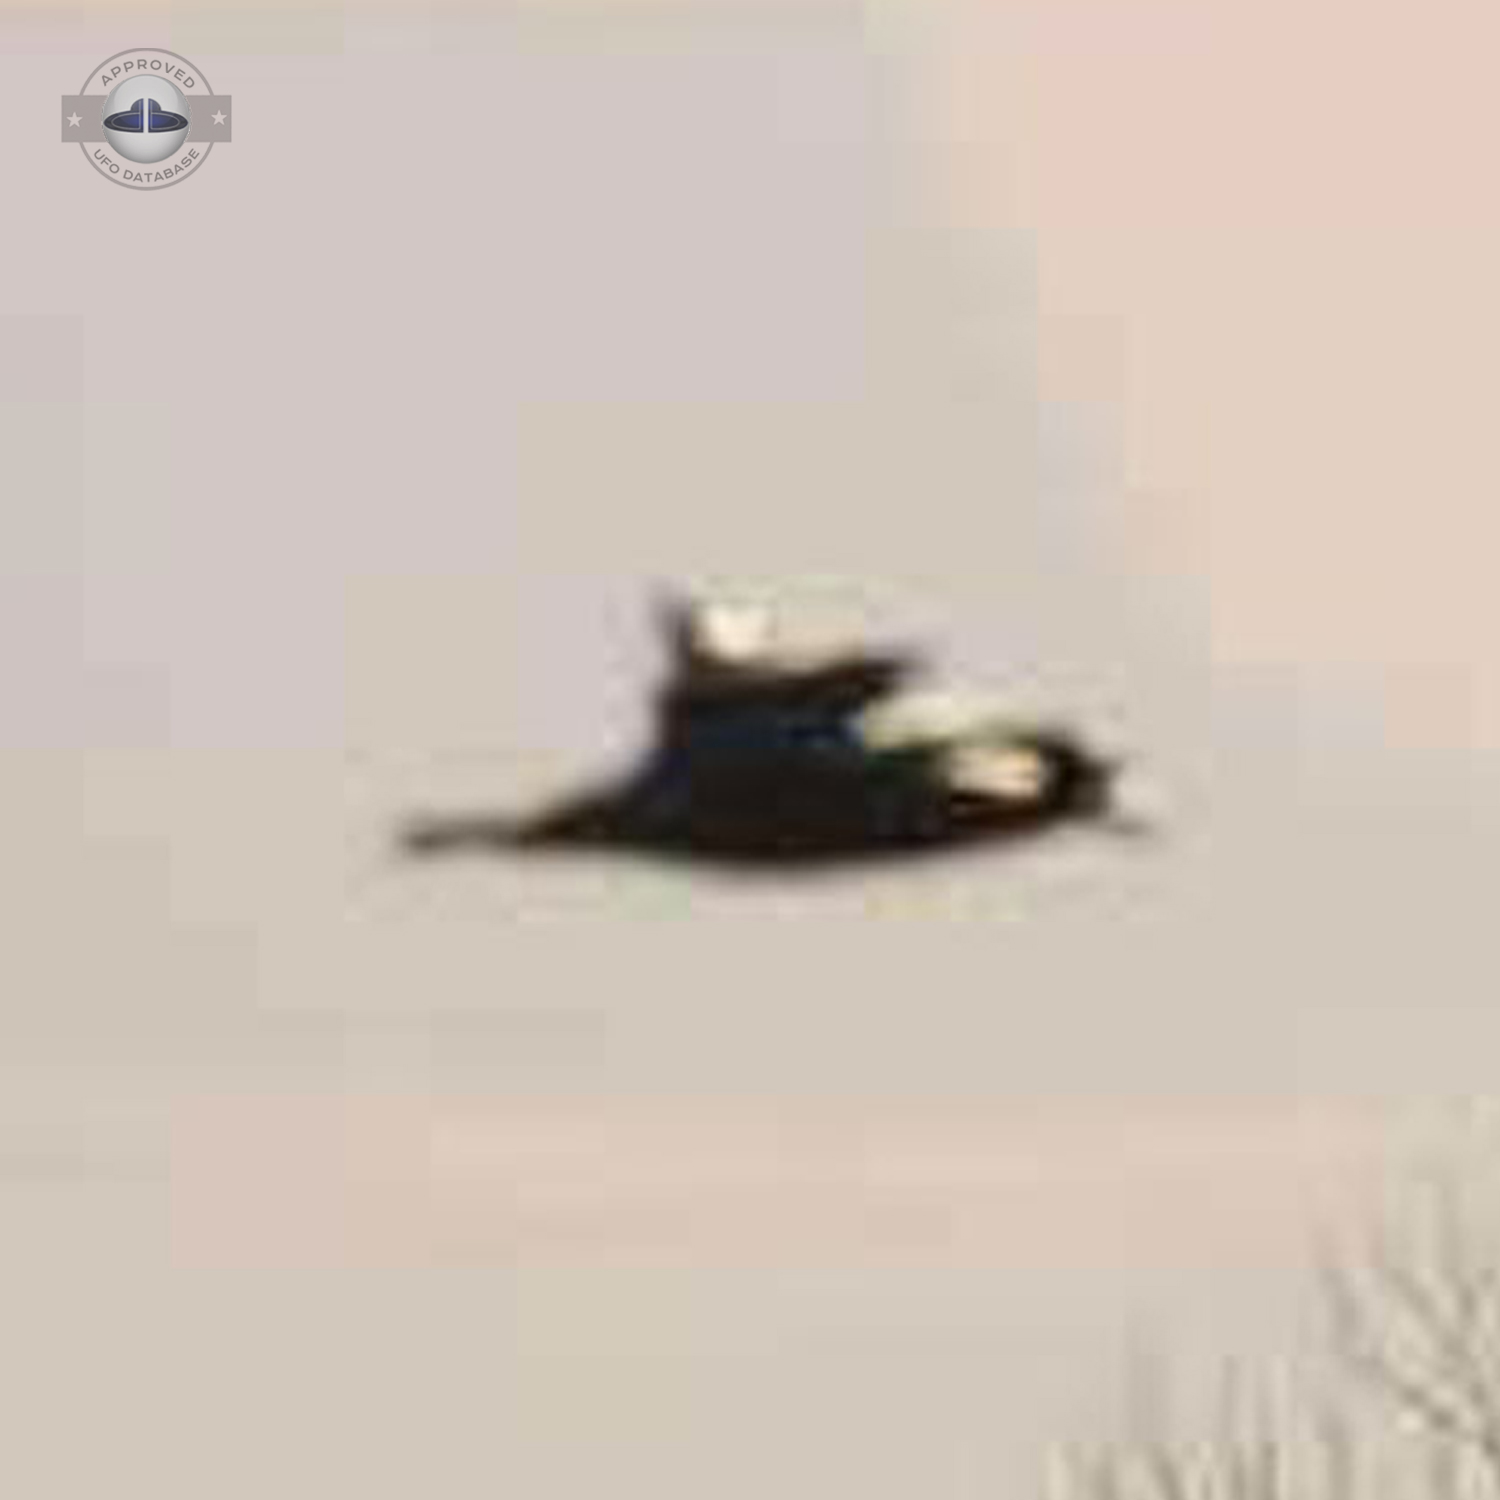 odd glow UFO making a whirling sound when passing by leaving glow UFO Picture #83-3